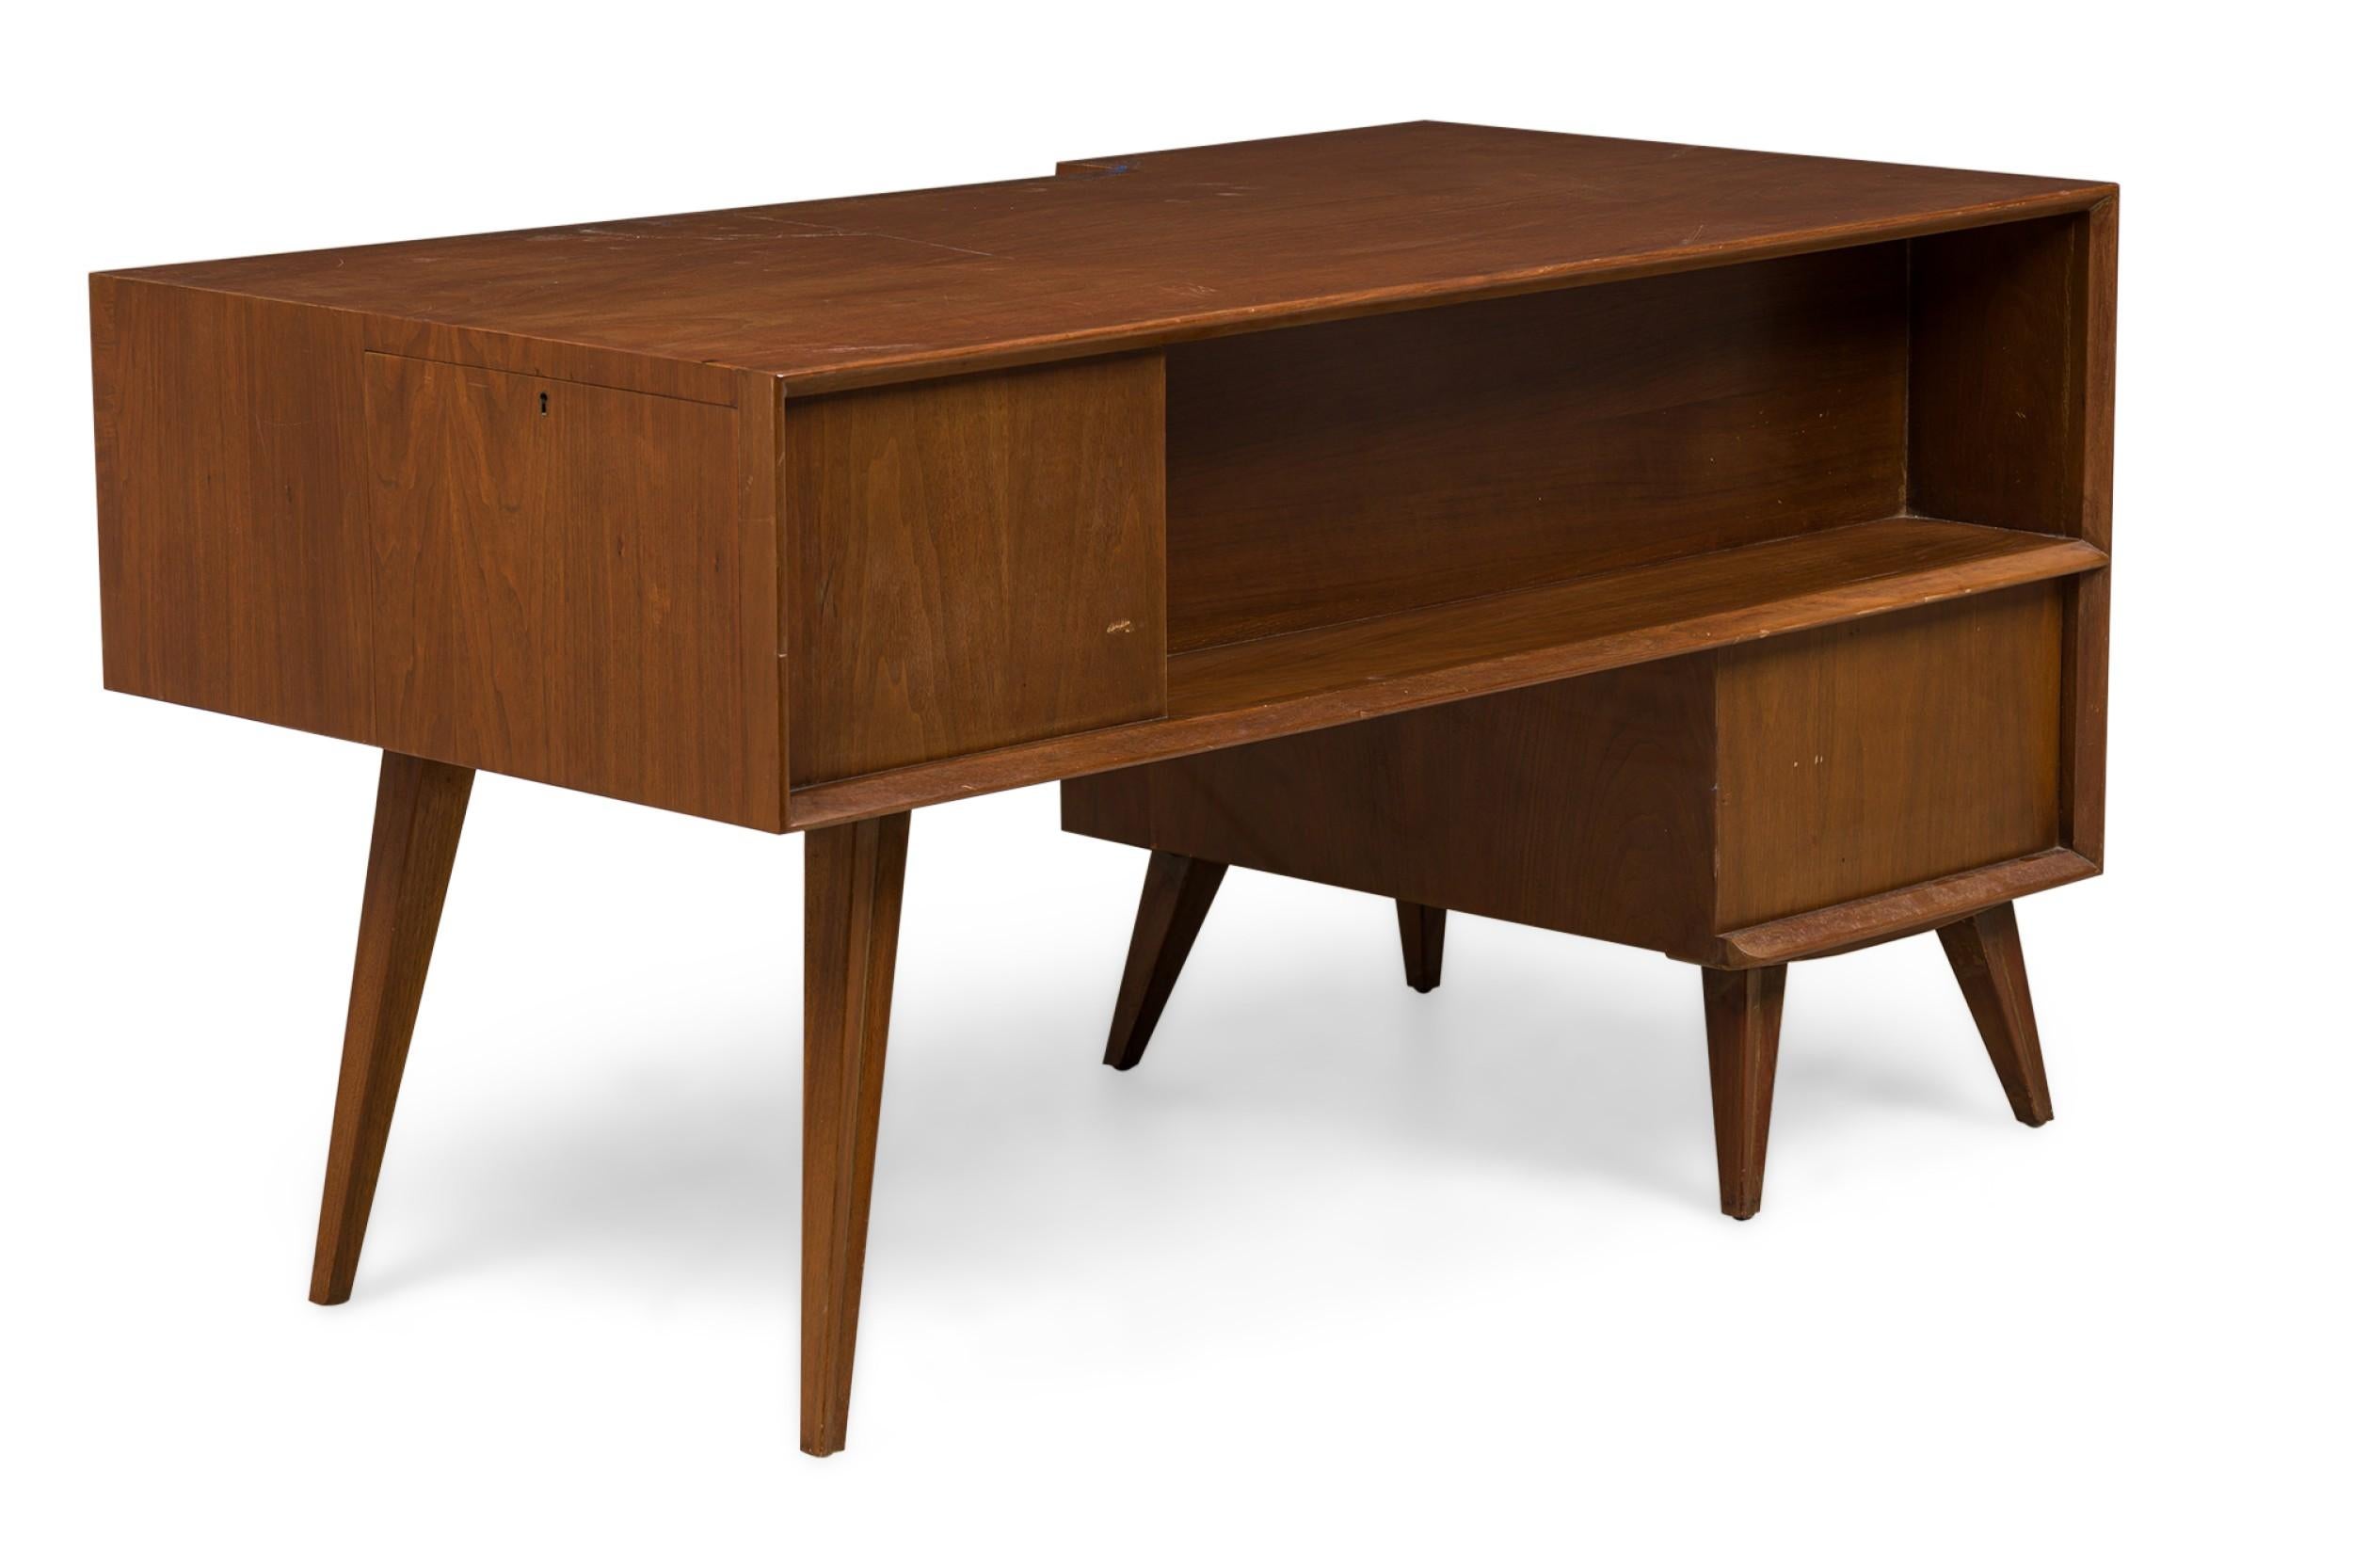 Italian Mid-Century Walnut Ponti Style Desk In Good Condition For Sale In New York, NY